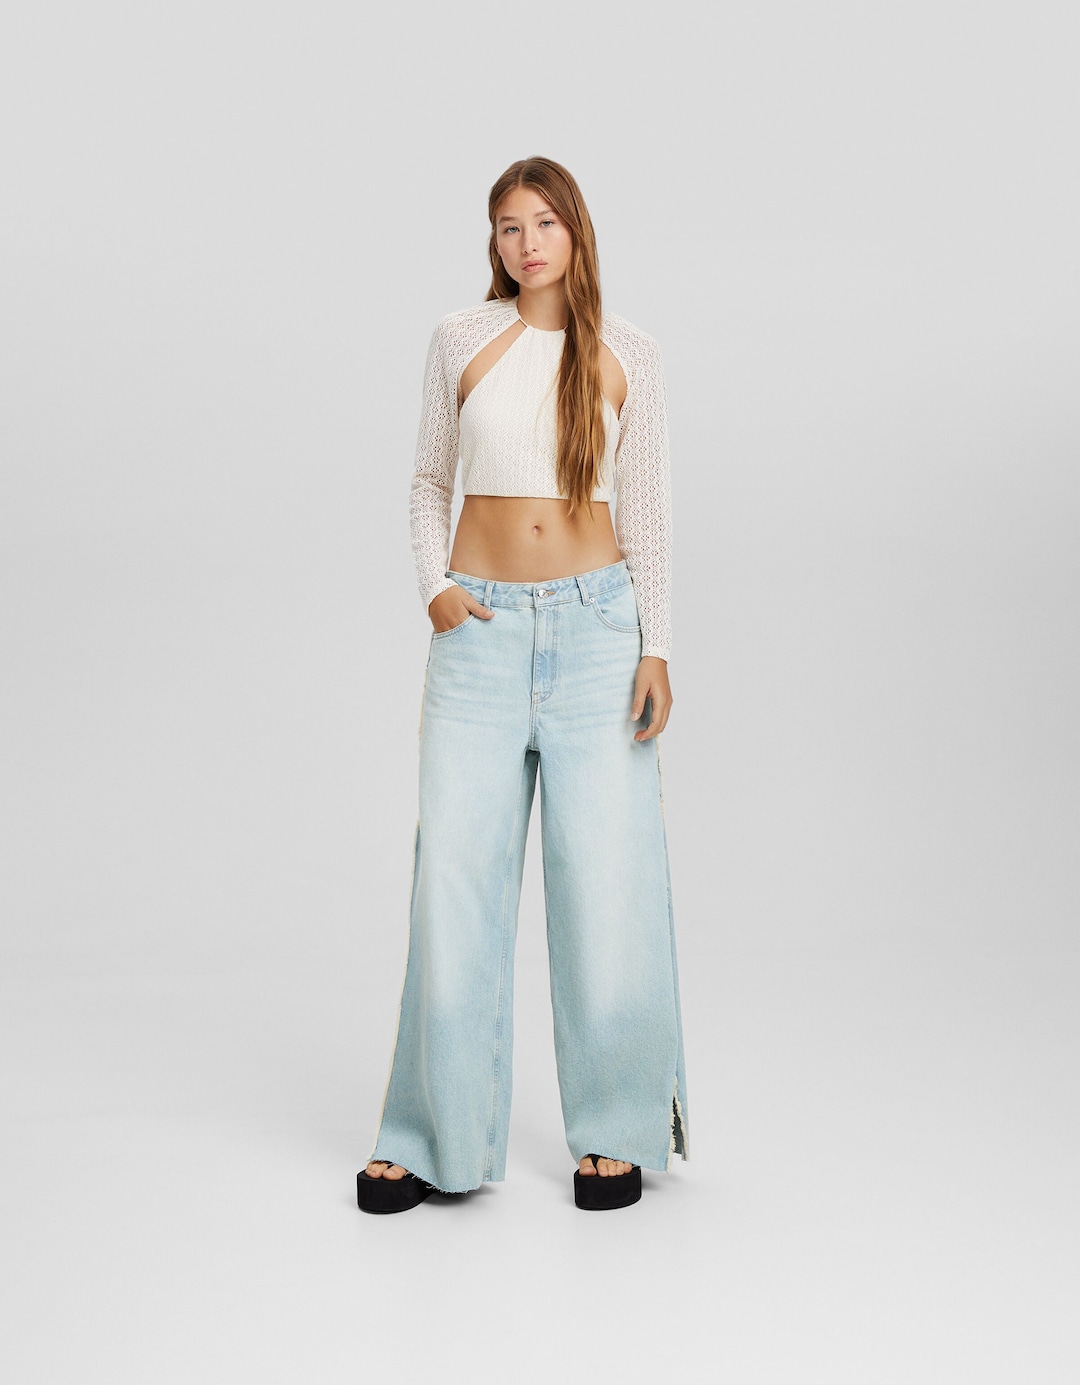 Jeans wide abertura lateral